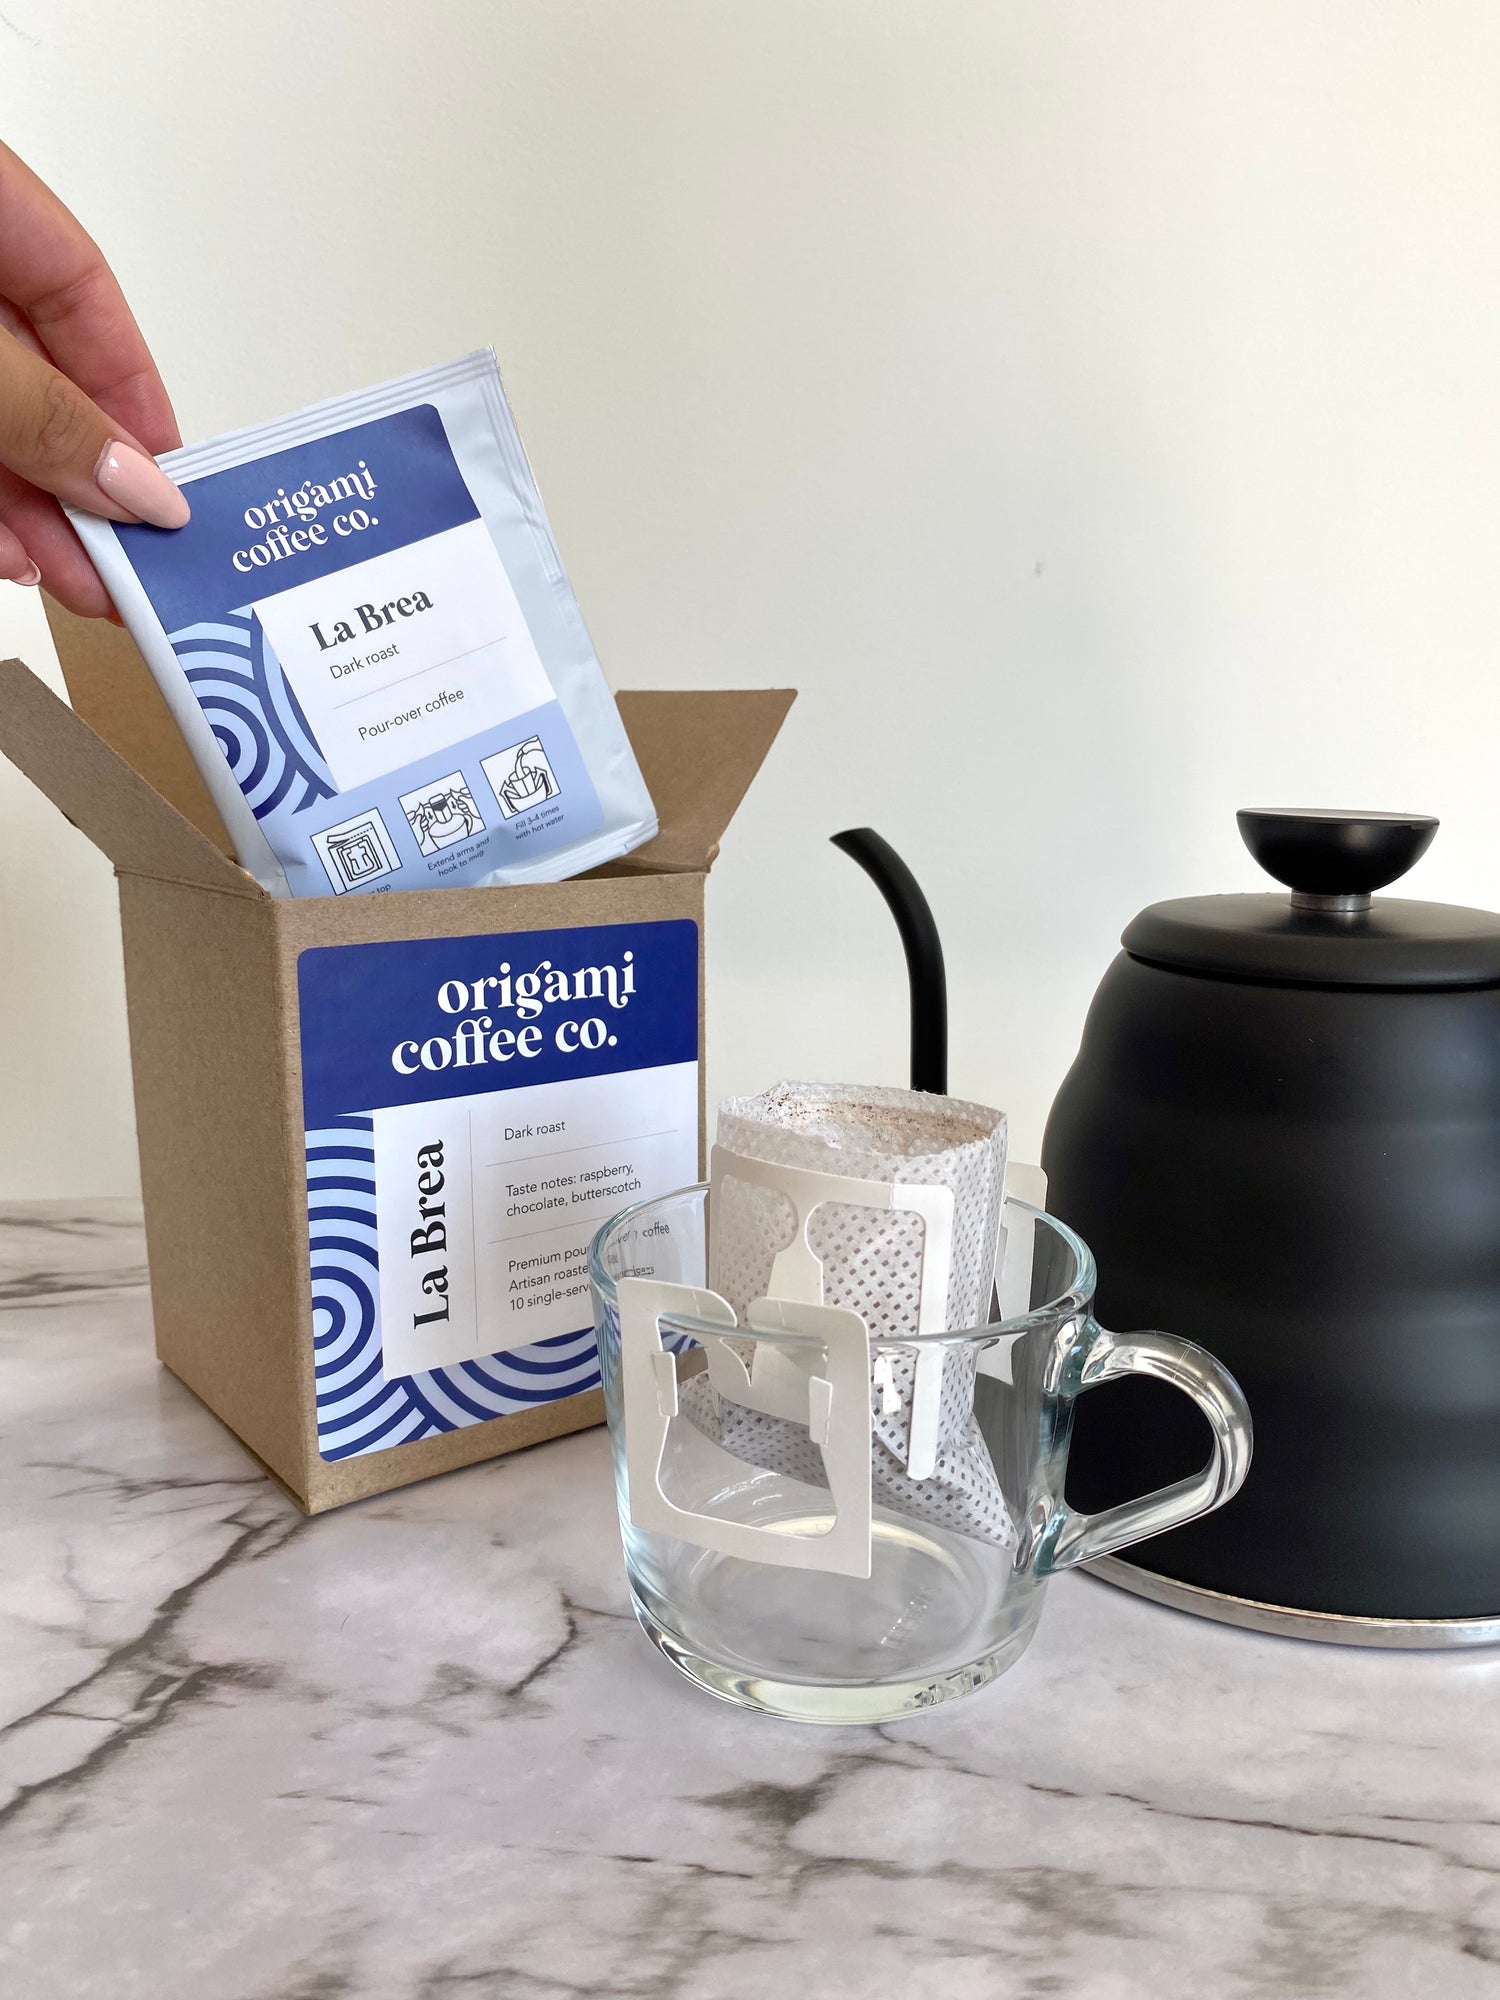 Origami Coffee Co. single-serve pour-over coffee pack with box, glass mug, and matte black Hario kettle.